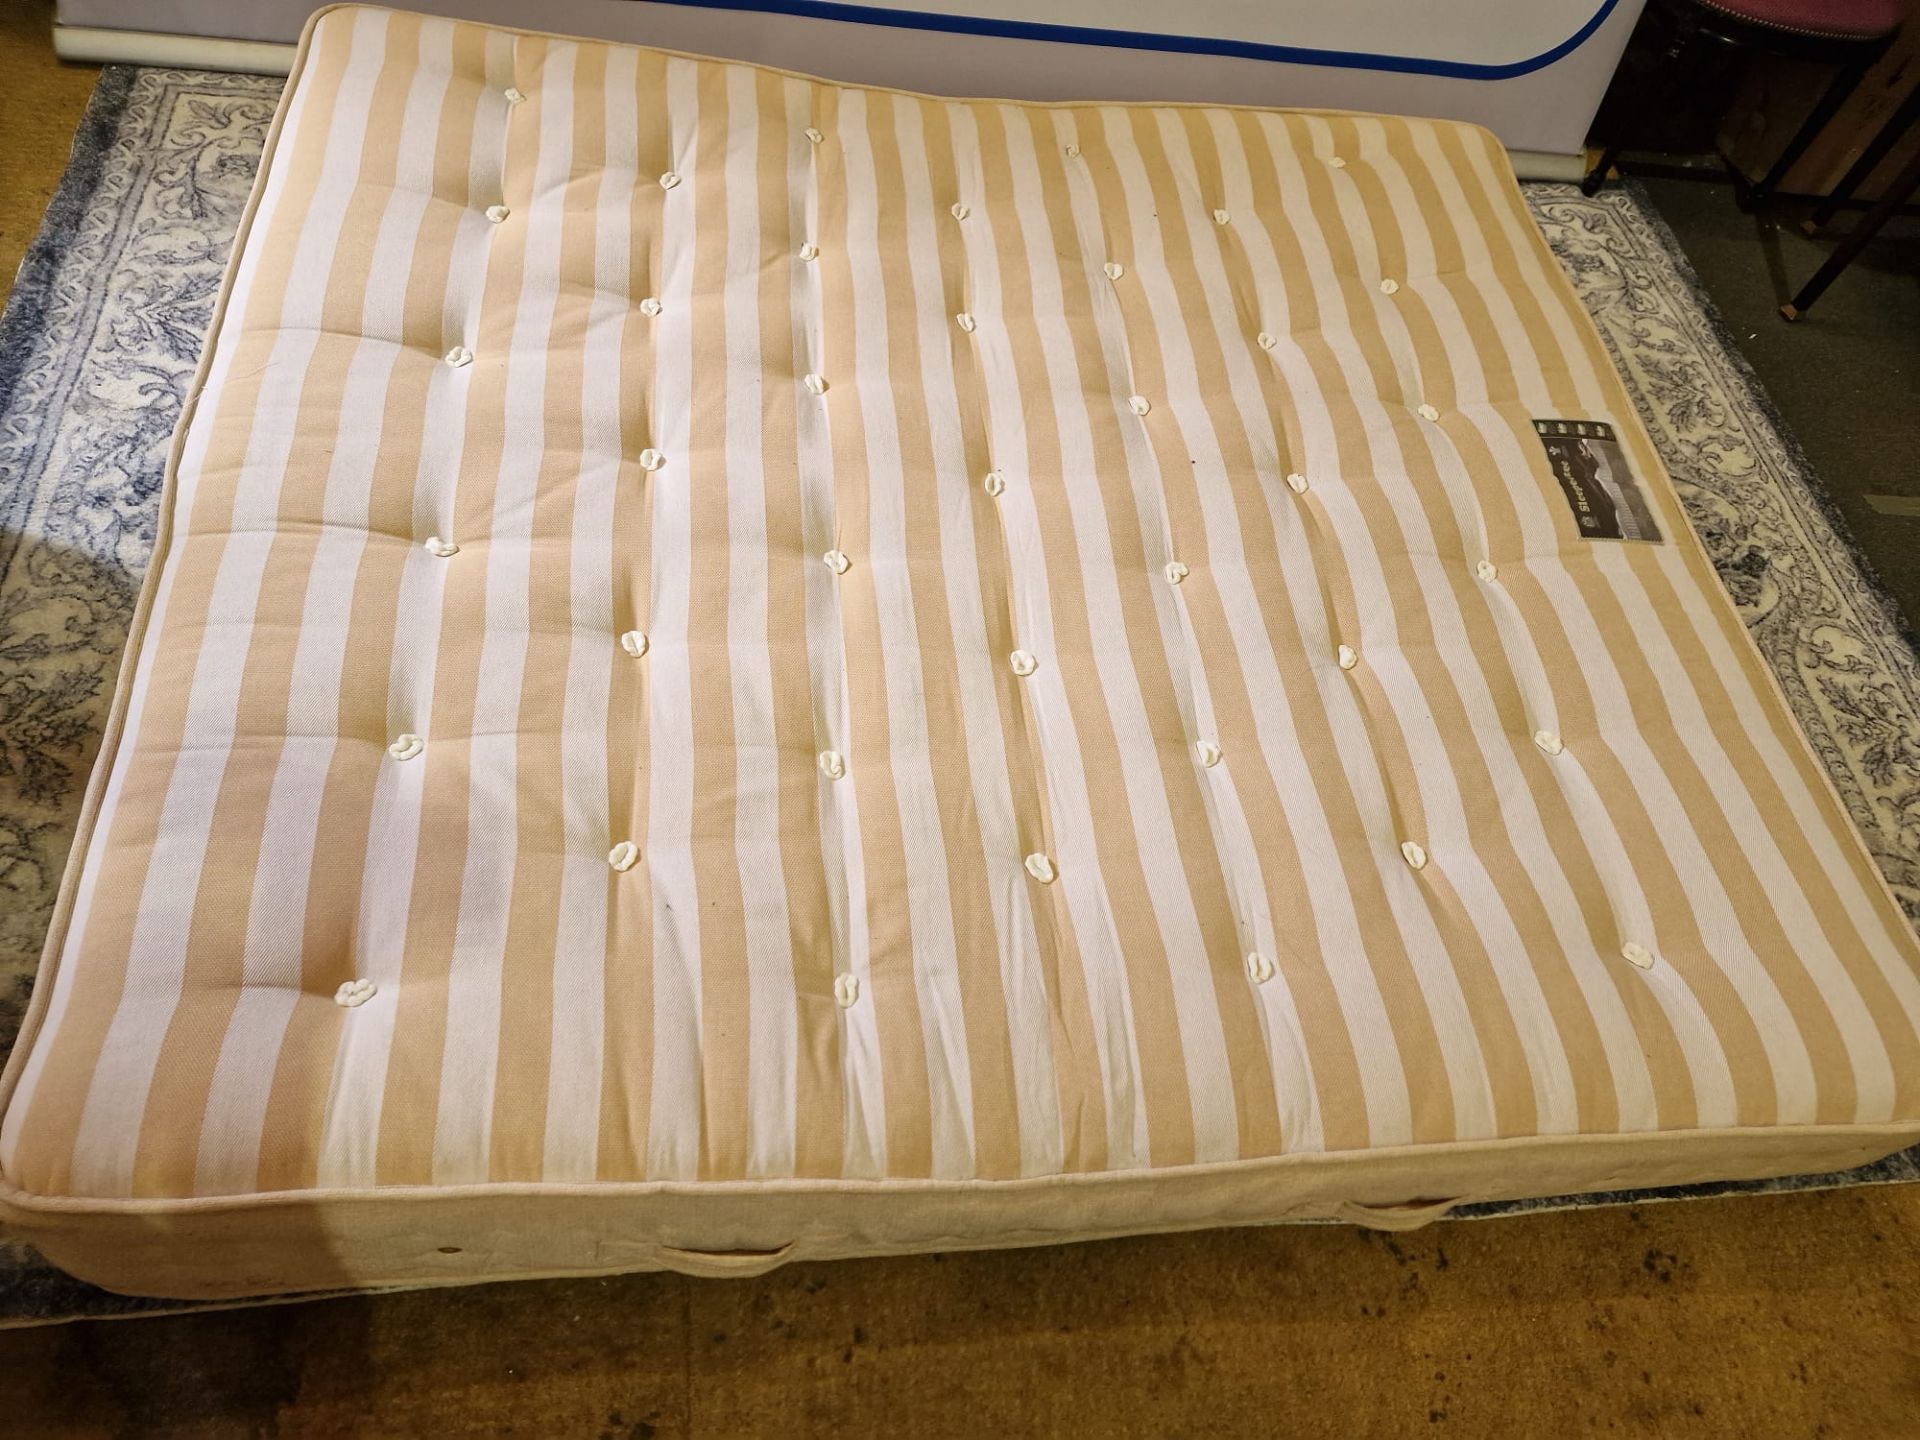 Sleepeezee Hospitality Collection Hotels 1490 Superking Mattress only - individual pocketed - Image 6 of 6